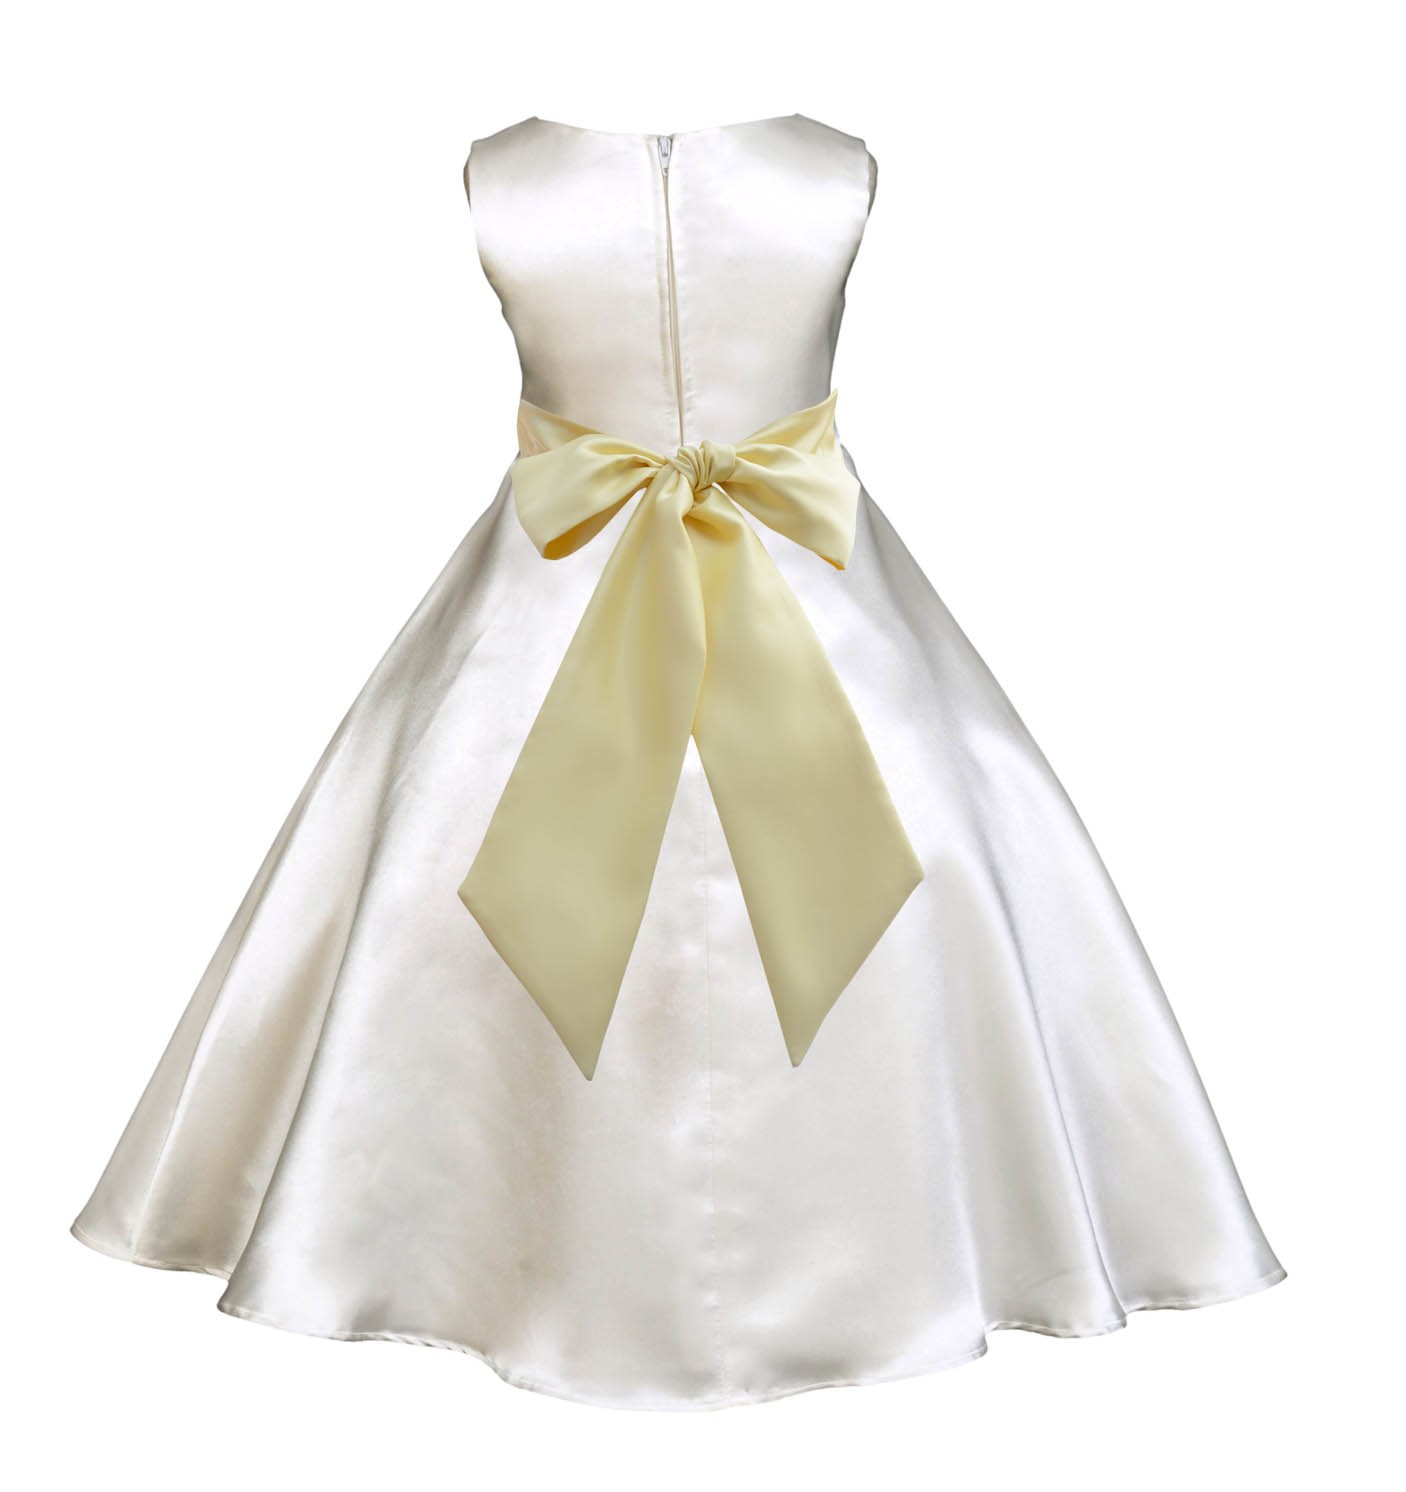 Ivory/Canary A-Line Satin Flower Girl Dress Pageant Reception 821S